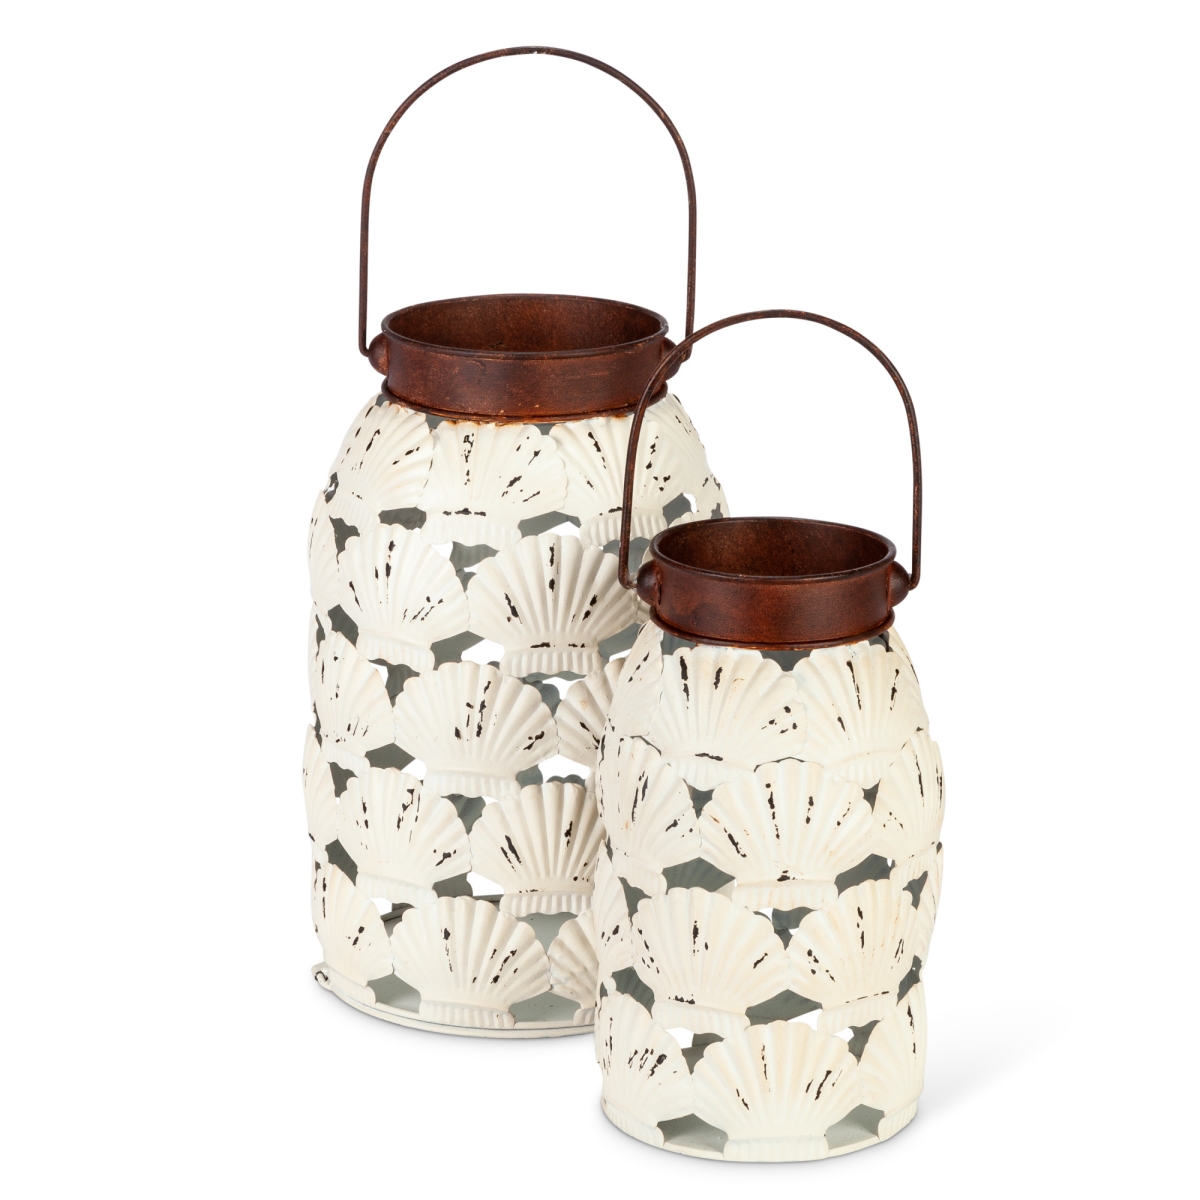 Gerson 94625ec Assorted-size White Metal Shell Lanterns With Bronze Rim & Handle Accent - Set Of 2